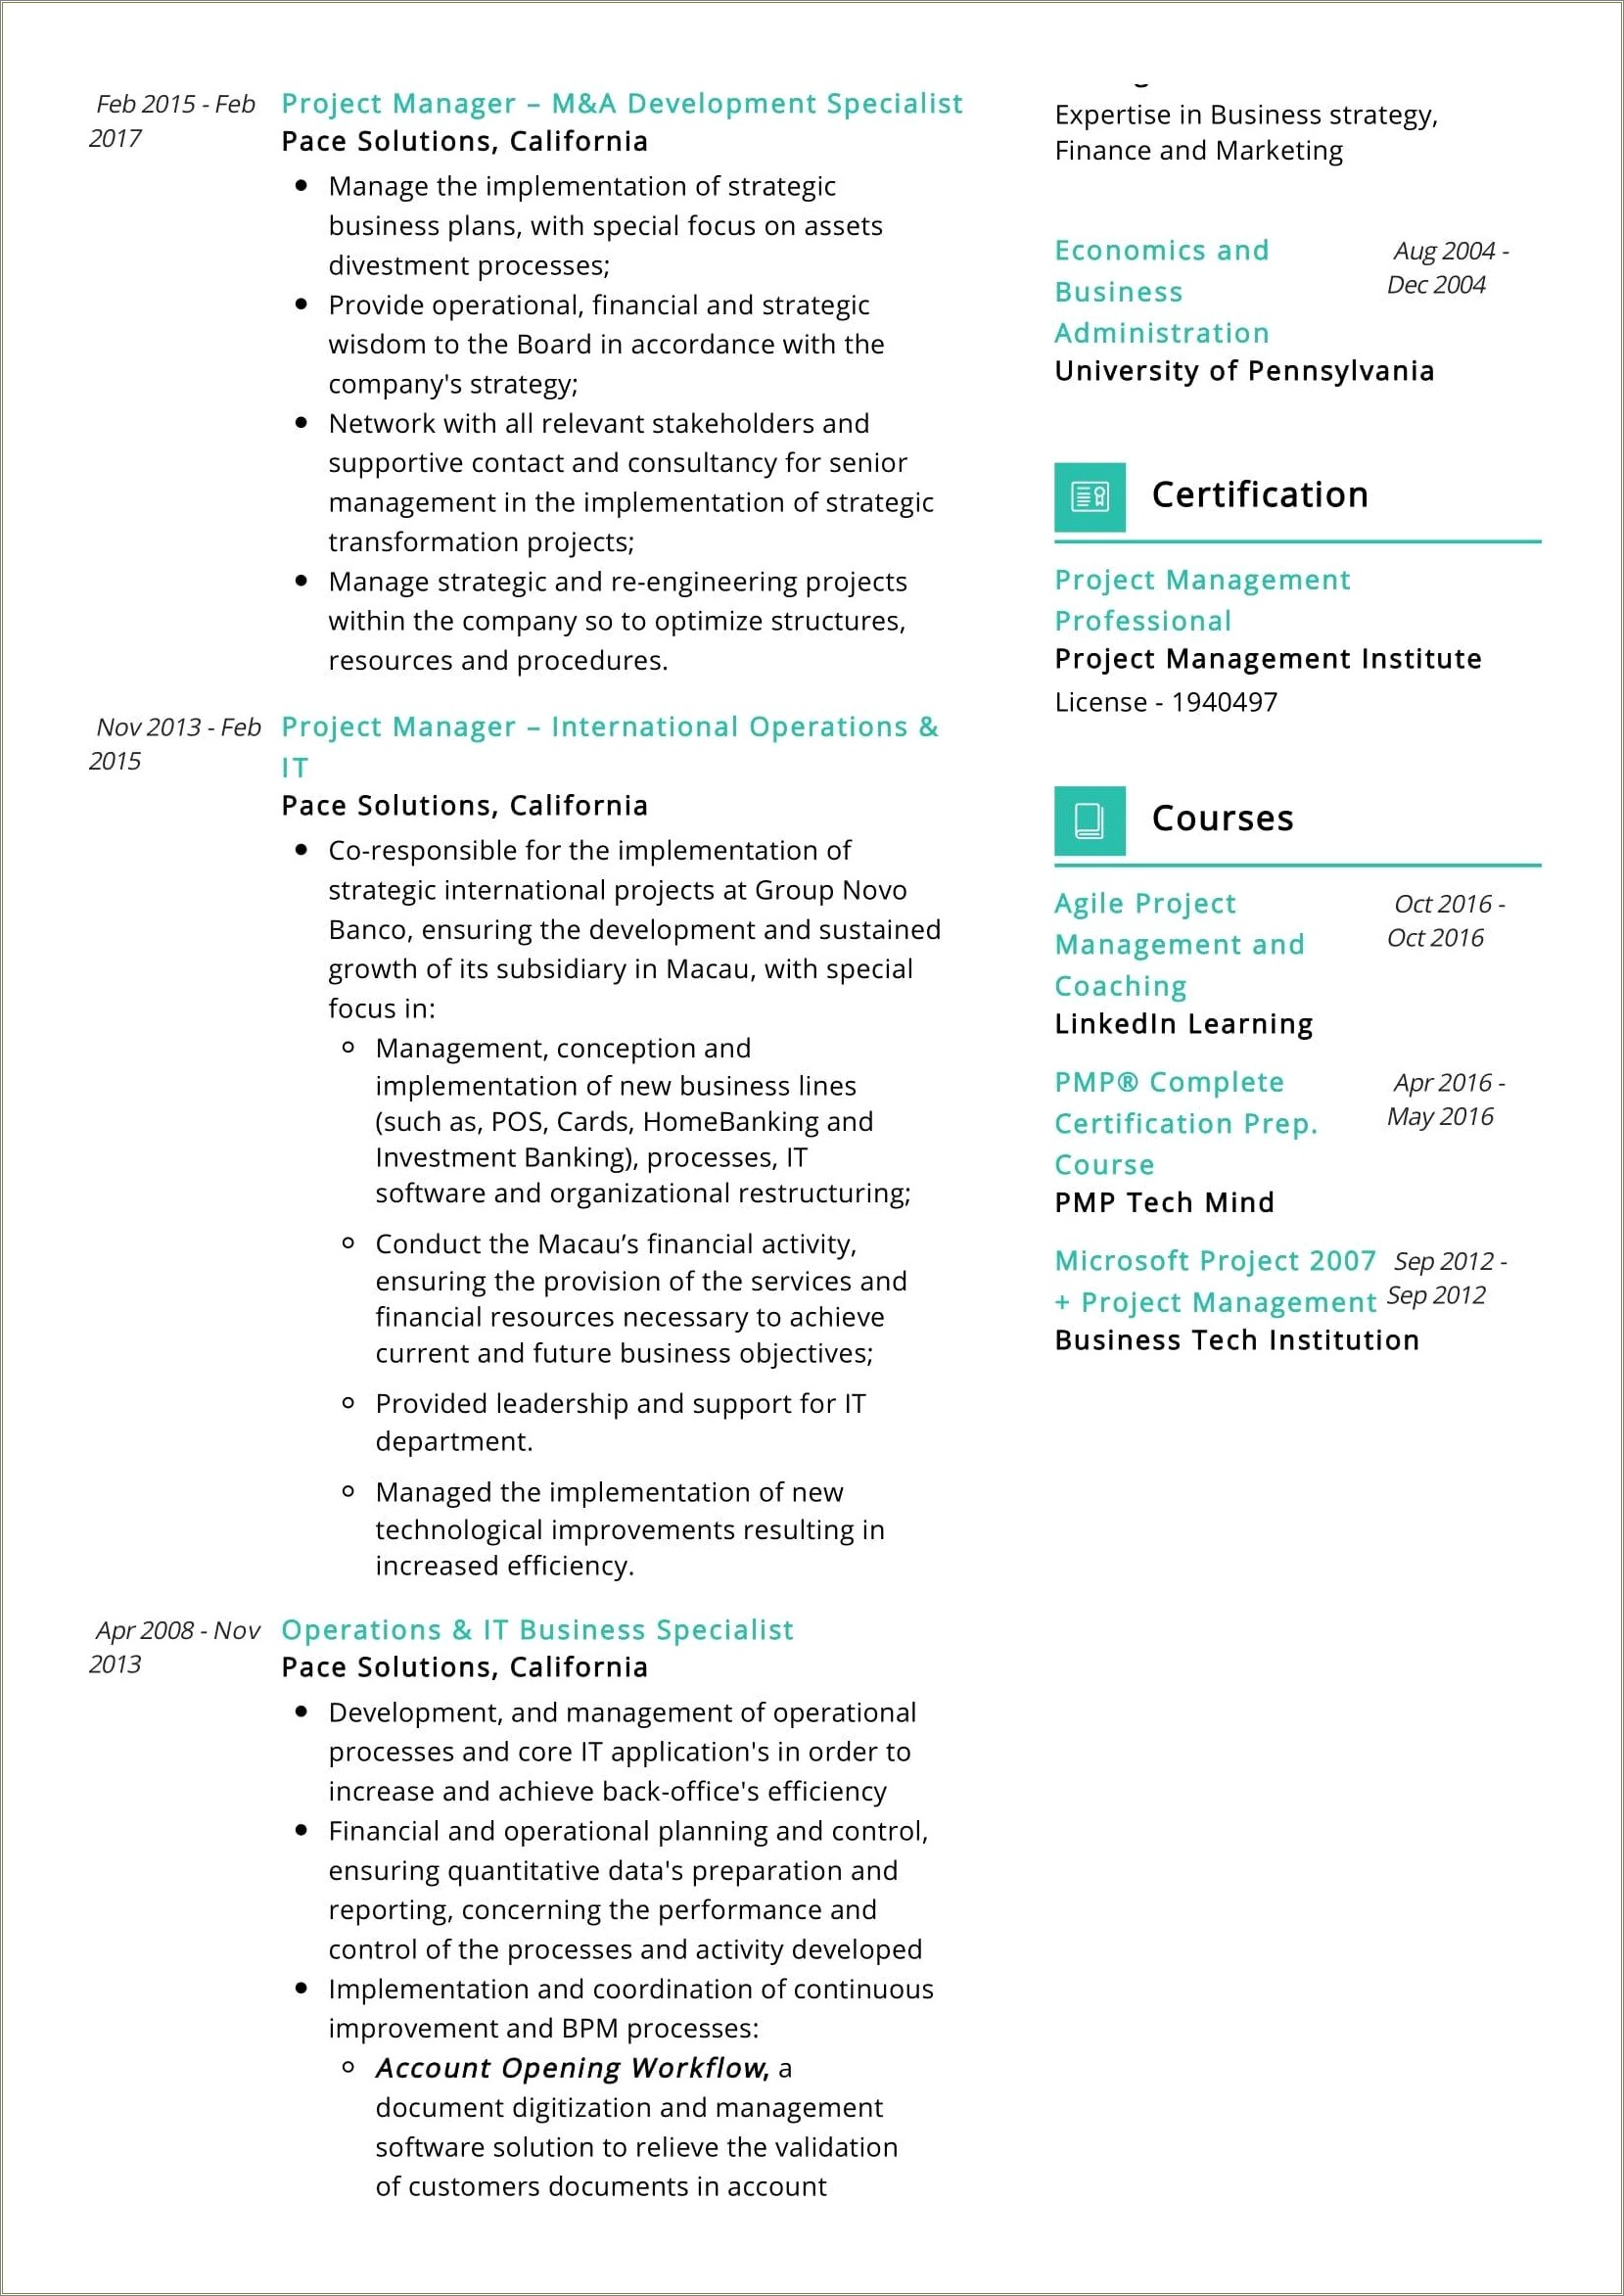 Qualifications For Bussiness Managemet Example On Resumes